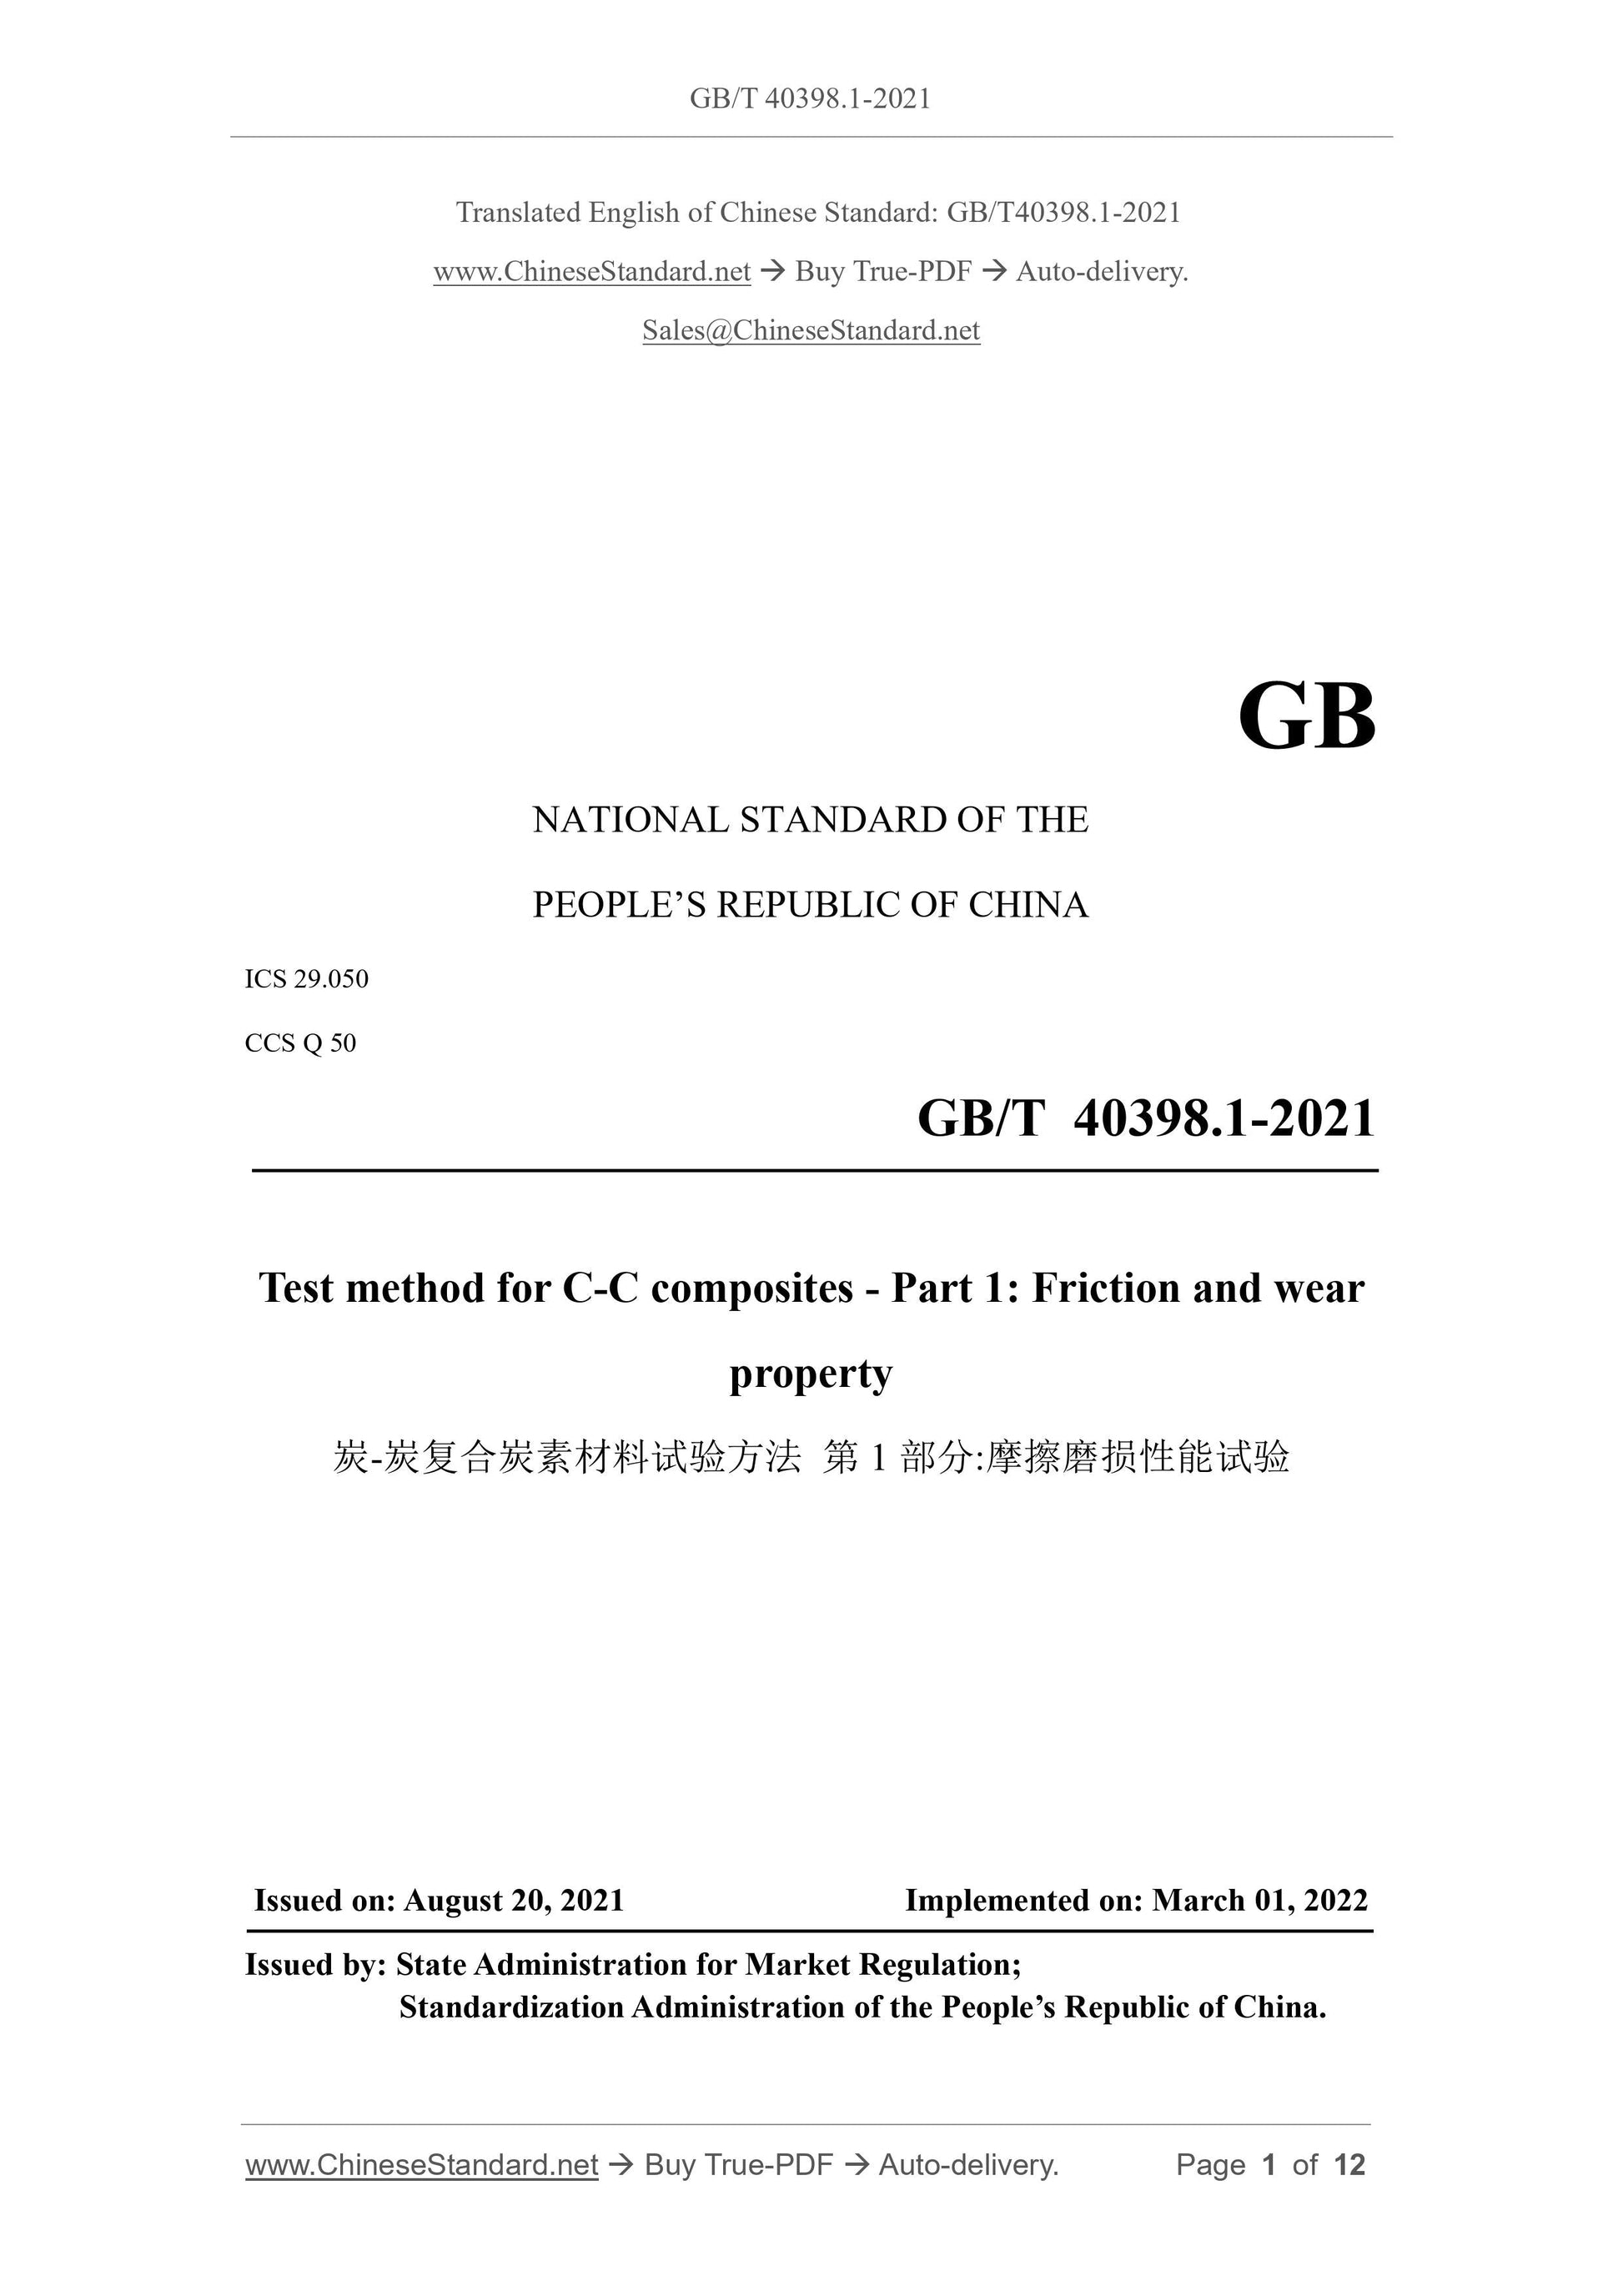 GB/T 40398.1-2021 Page 1